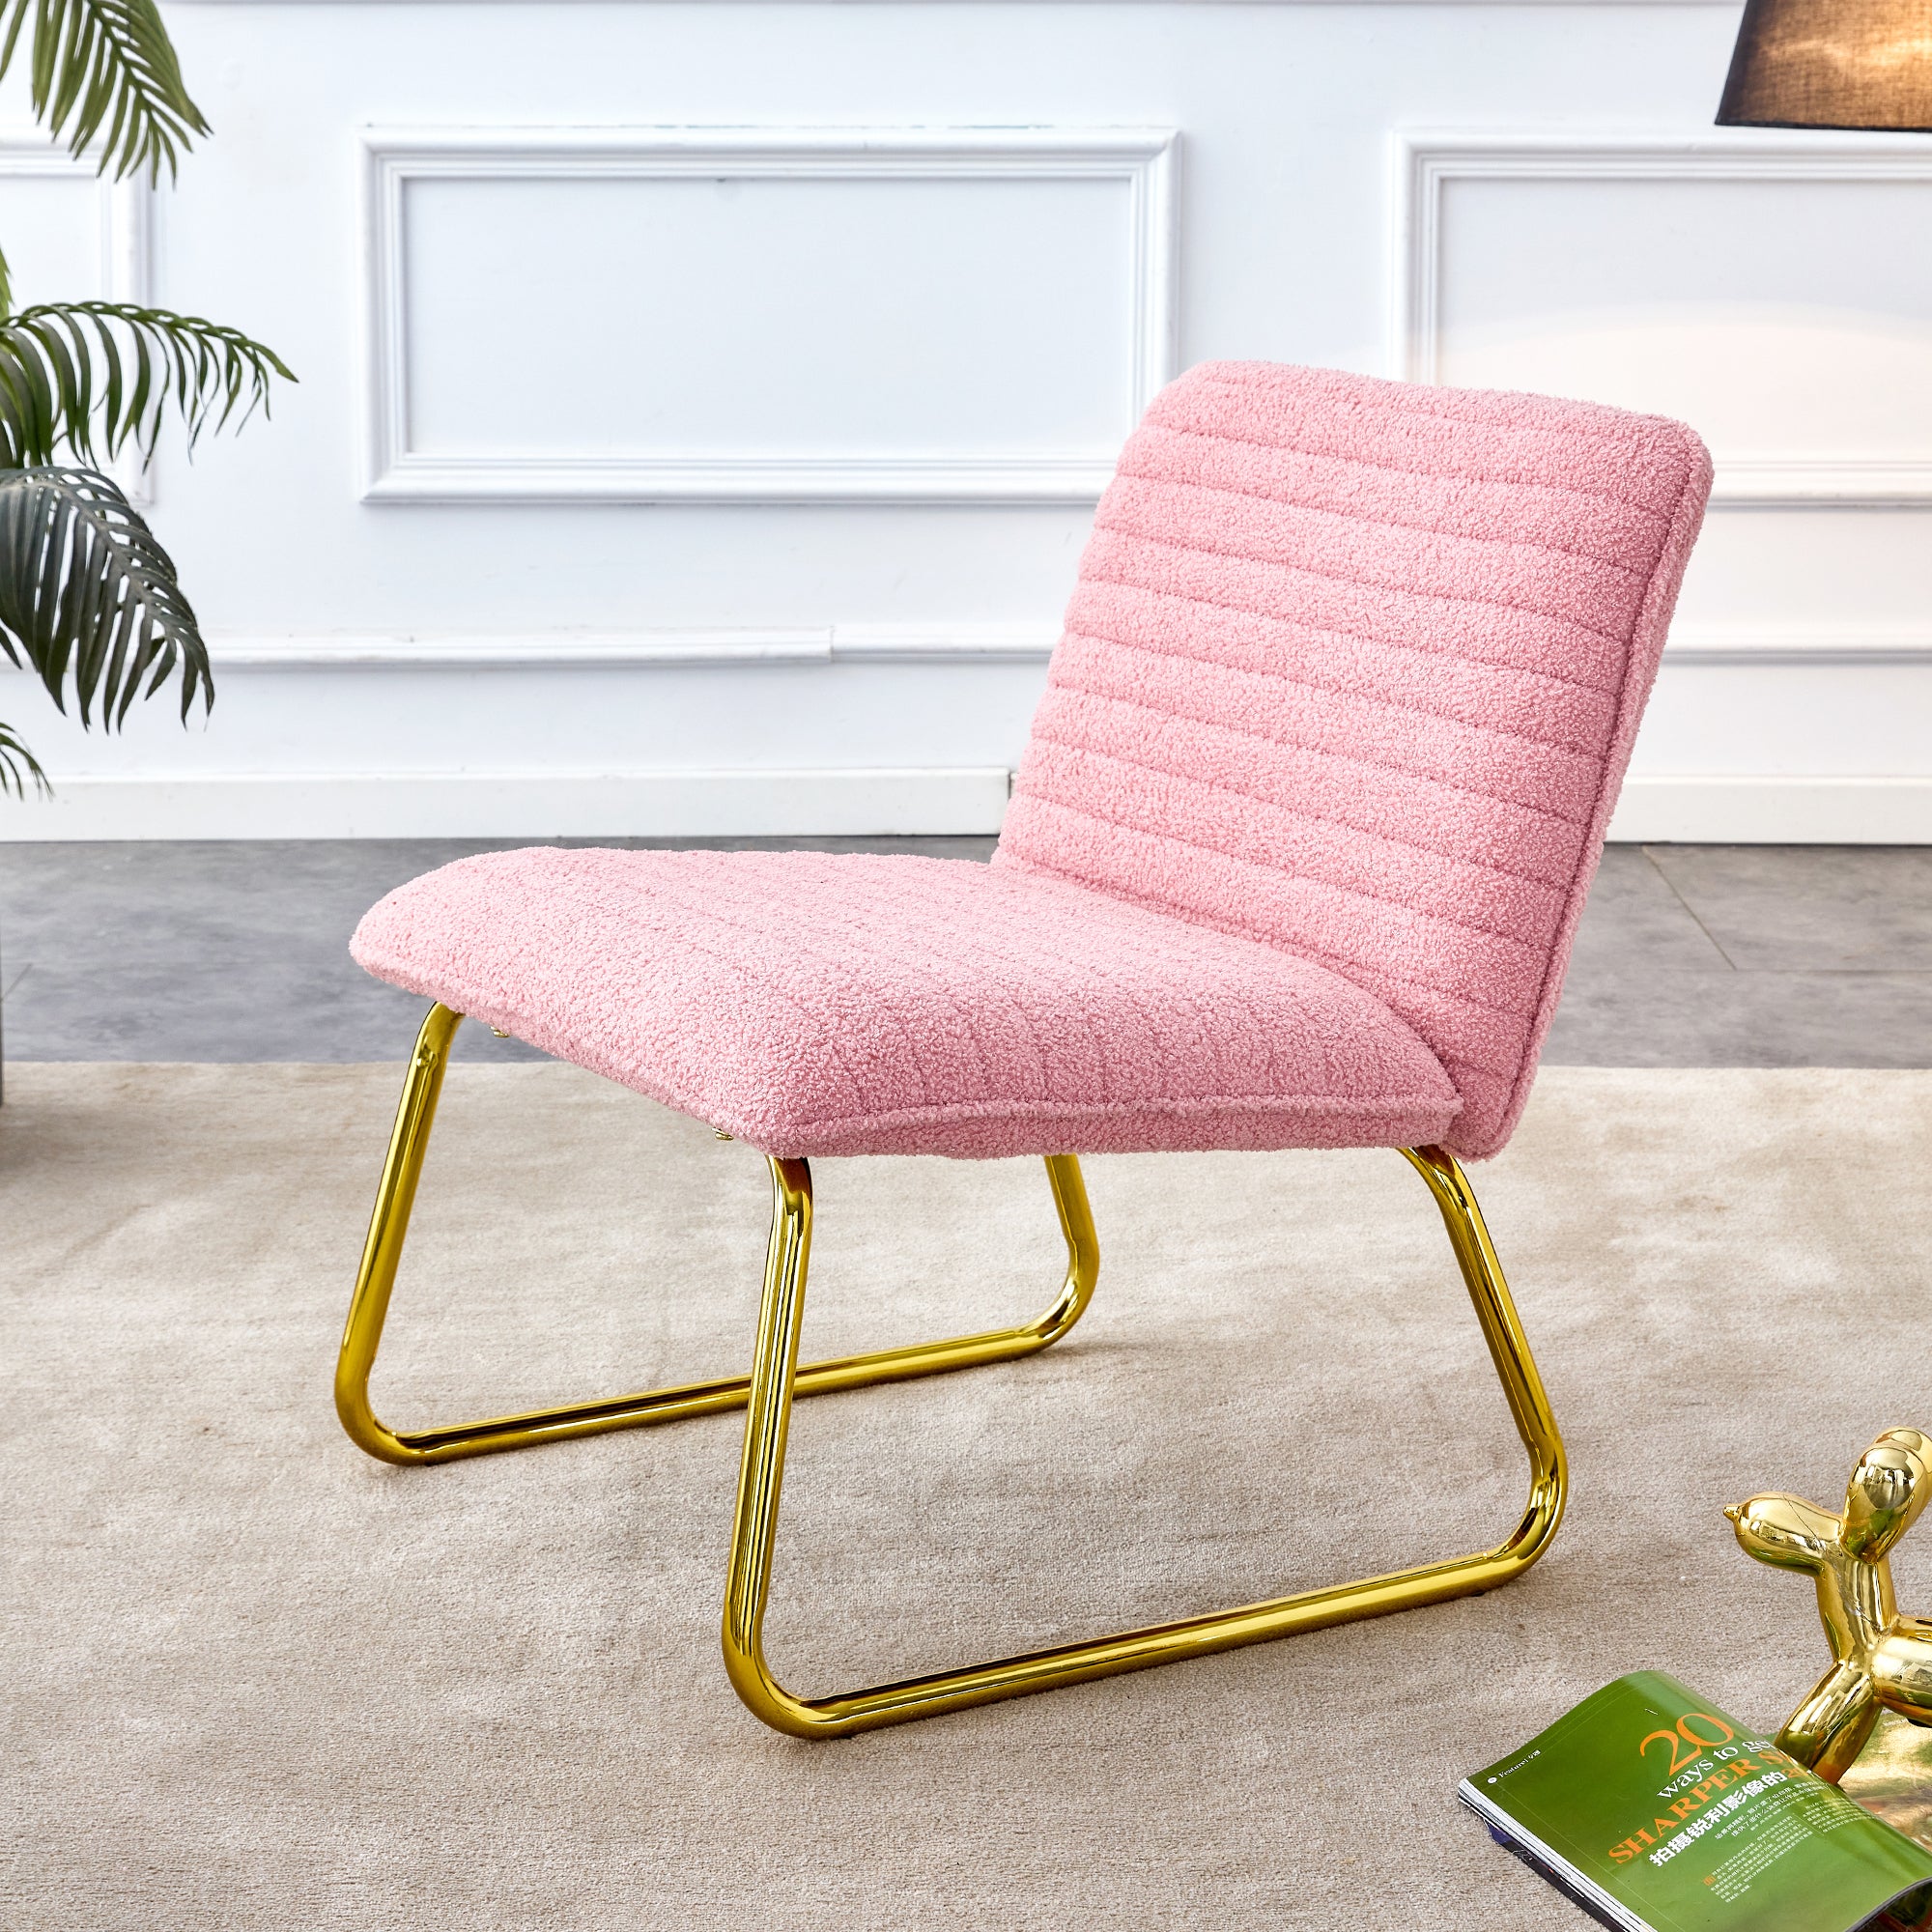 Pink-Plush-fabric--chair-with-gold-metal-legs.-Chairs-&-Seating